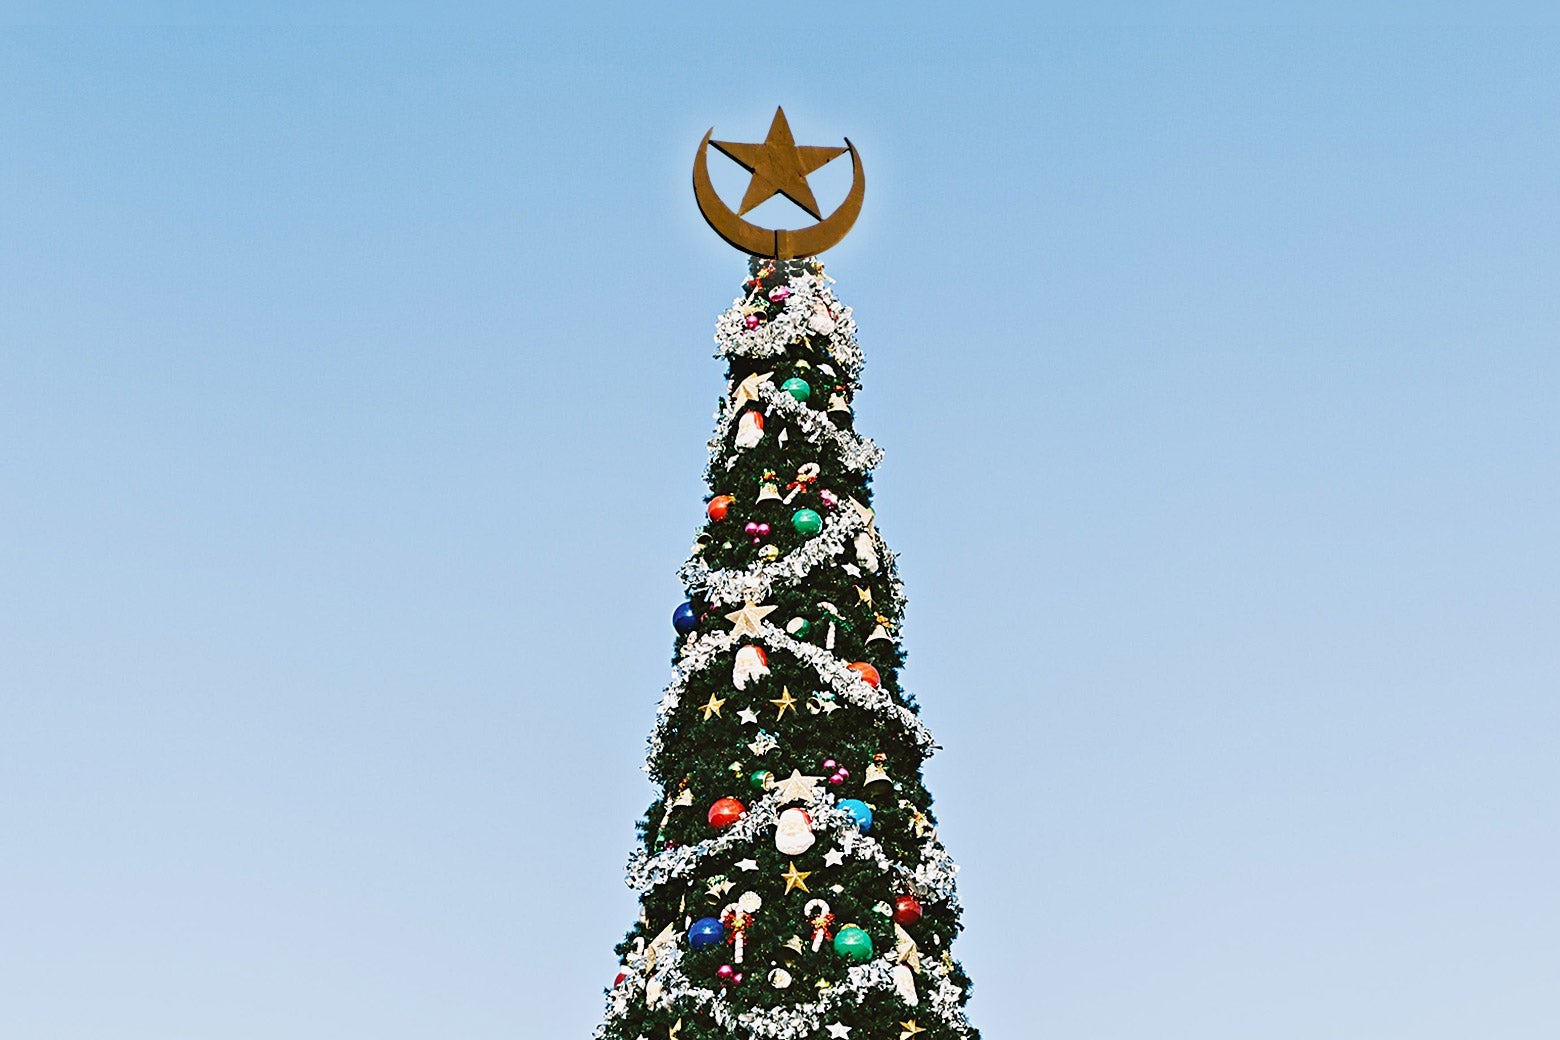 A Christmas tree with an Islamic star and crescent on top.